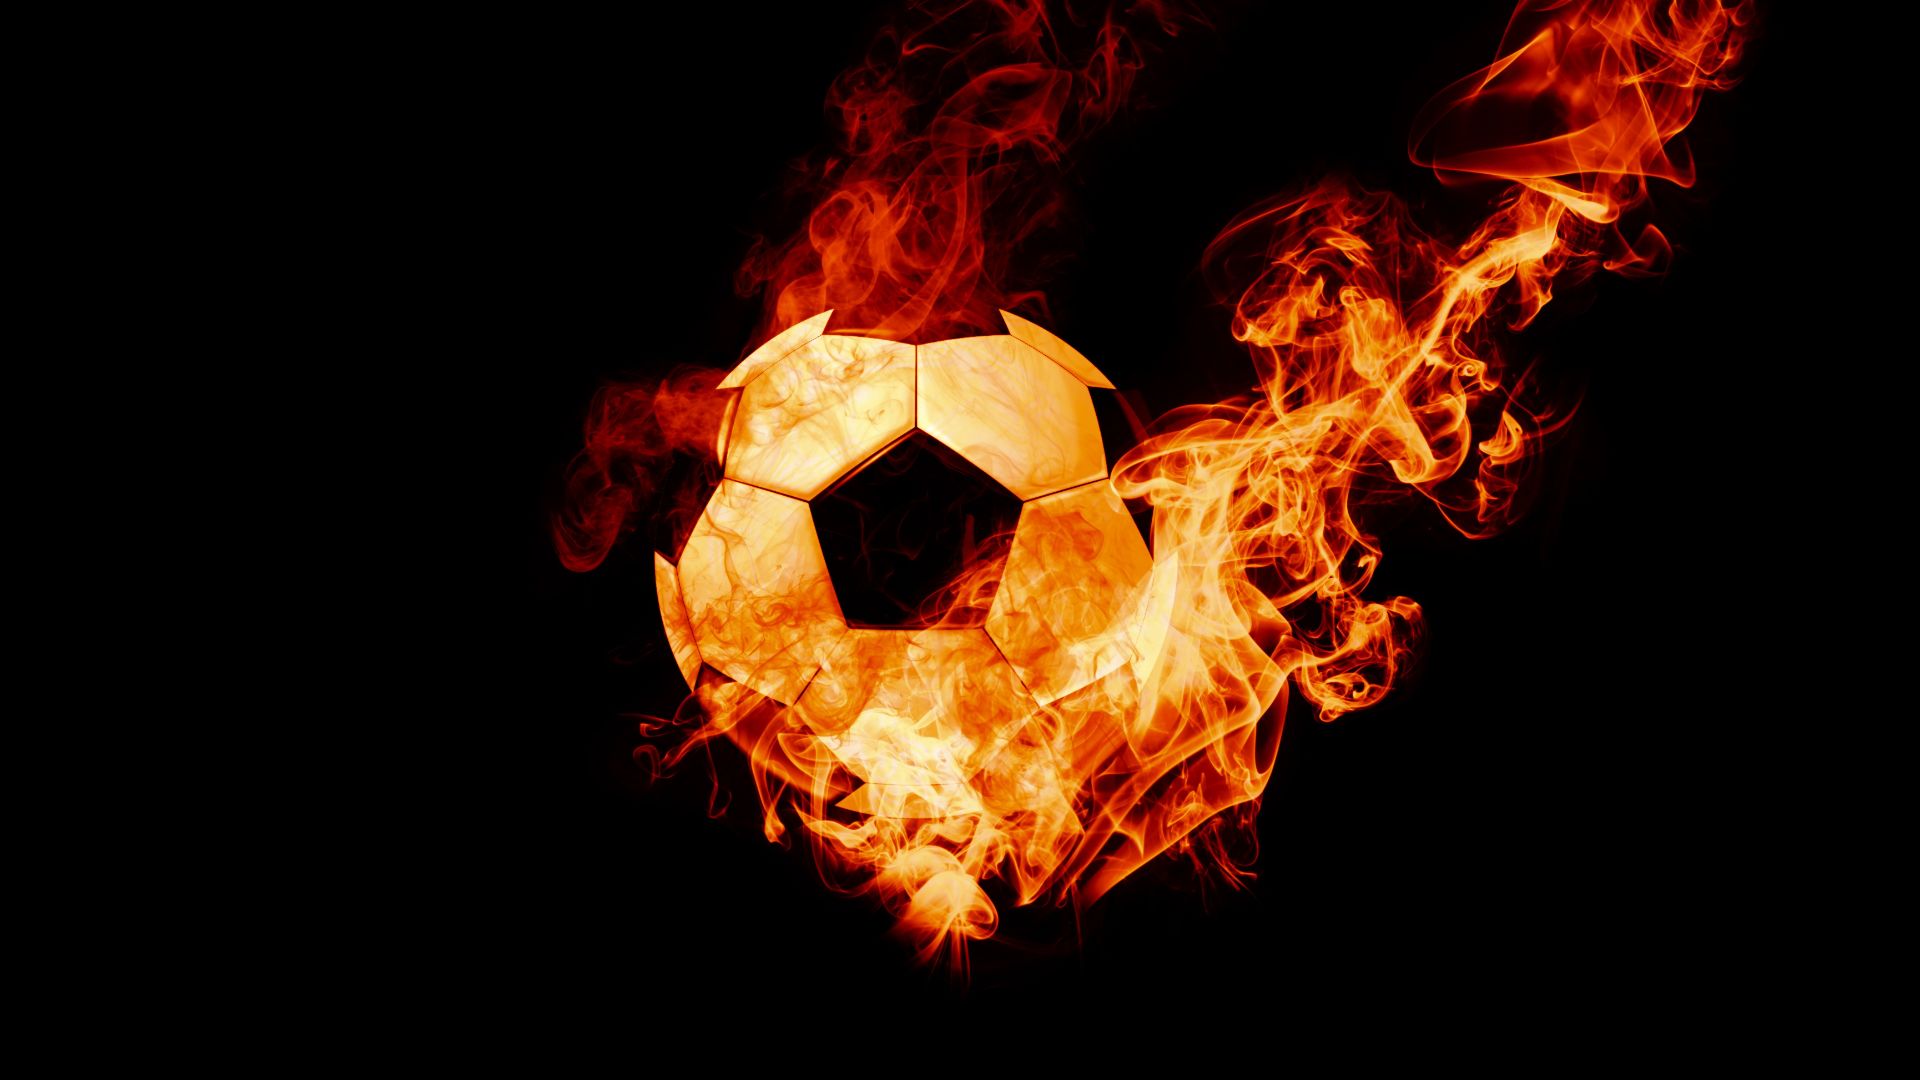 Football in flames on a black background